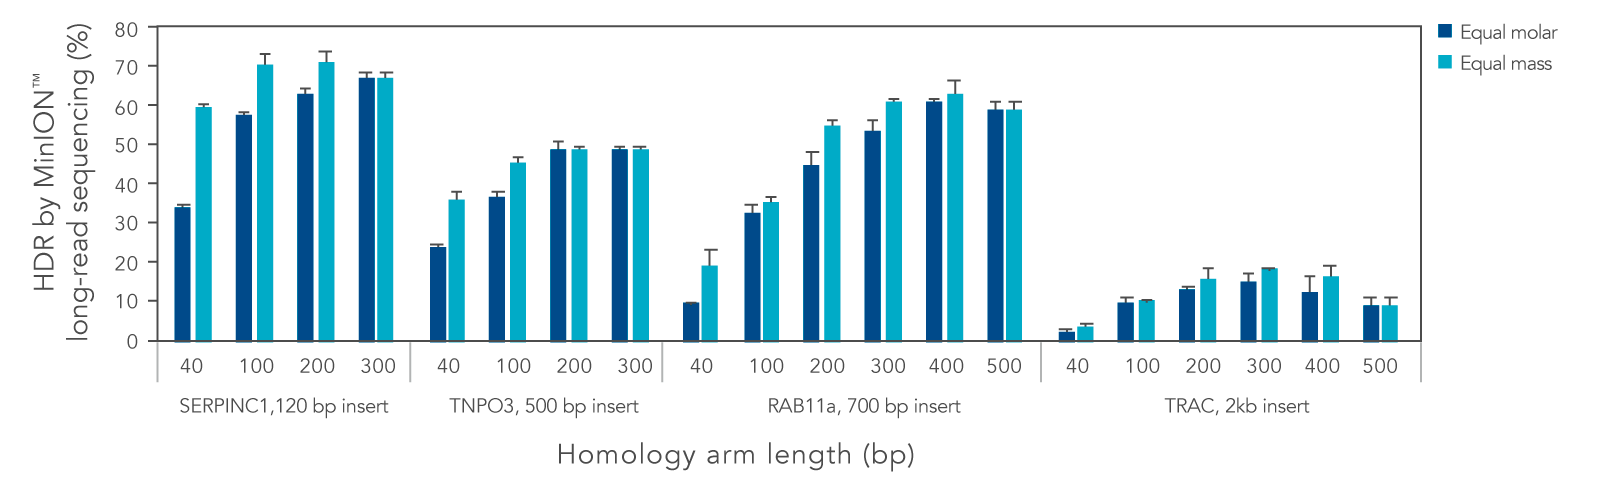 Homology arm lengths of 200–300 bp result in the highest HDR efficiency when using Alt-R HDR Donor Blocks.